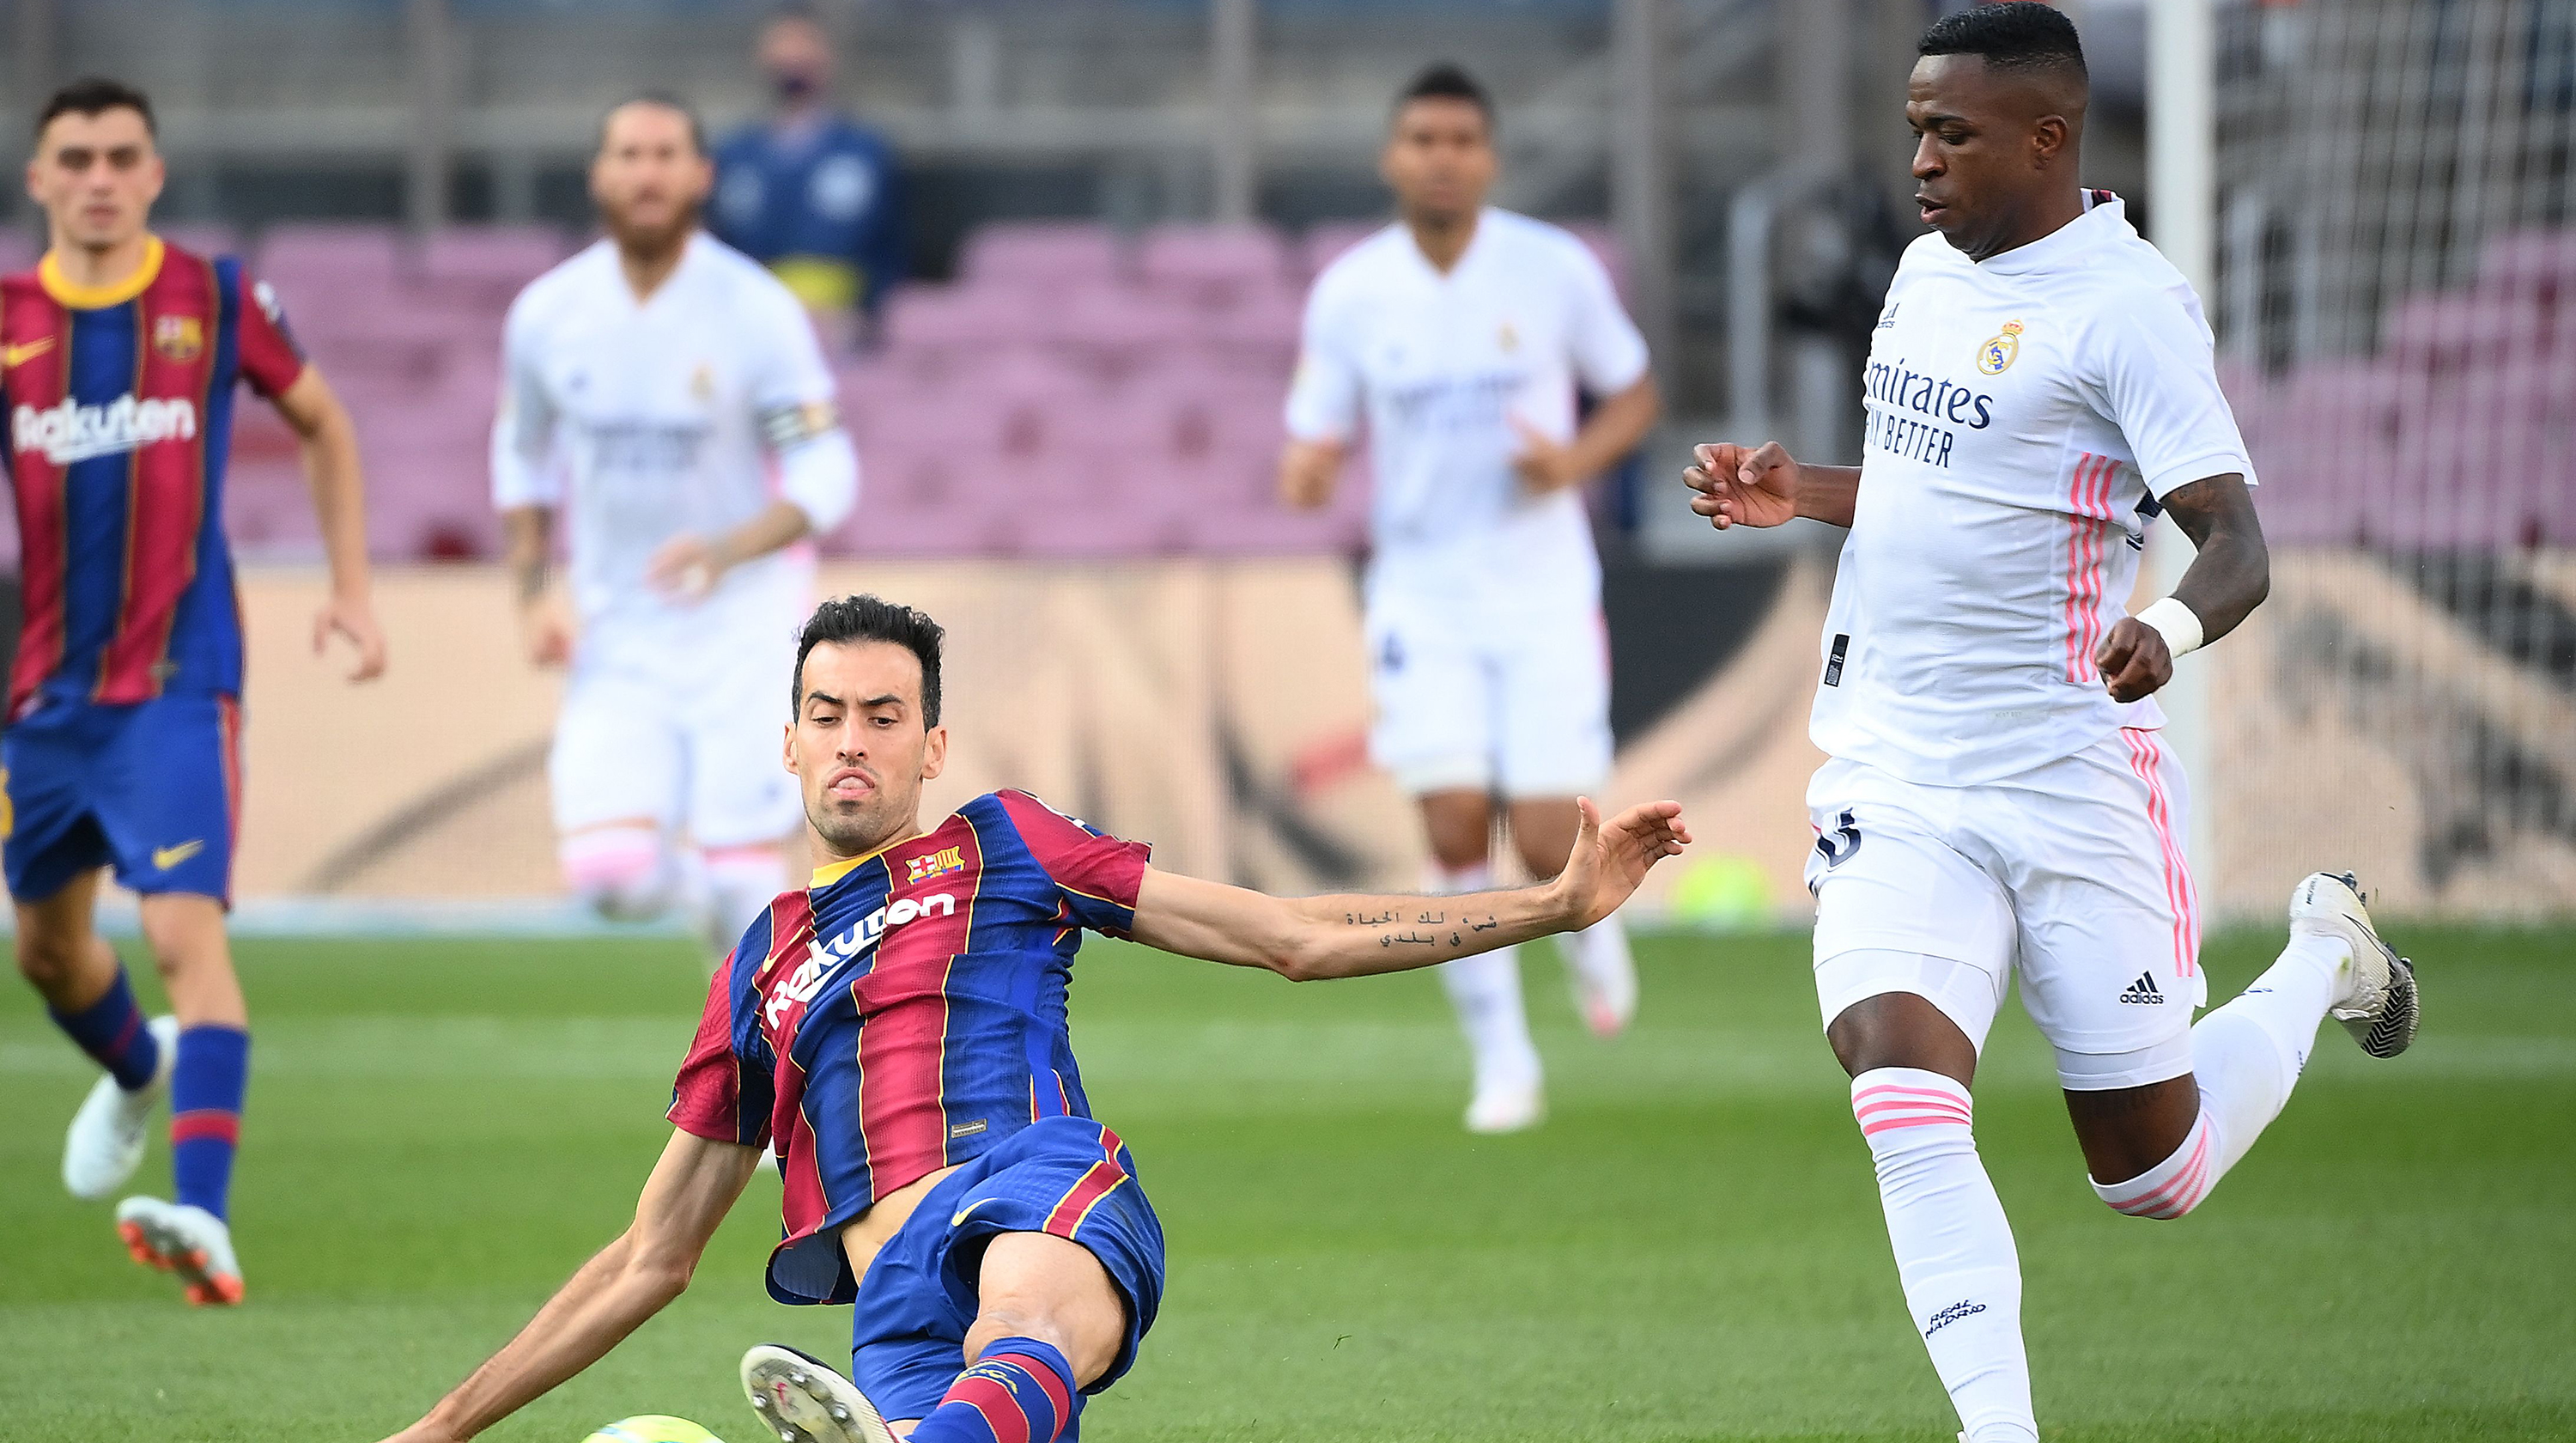 Real Madrid's Brazilian forward Vinicius Junior (R) challenges Barcelona's Spanish midfielder Sergio Busquets during the Spanish League football match between Barcelona and Real Madrid